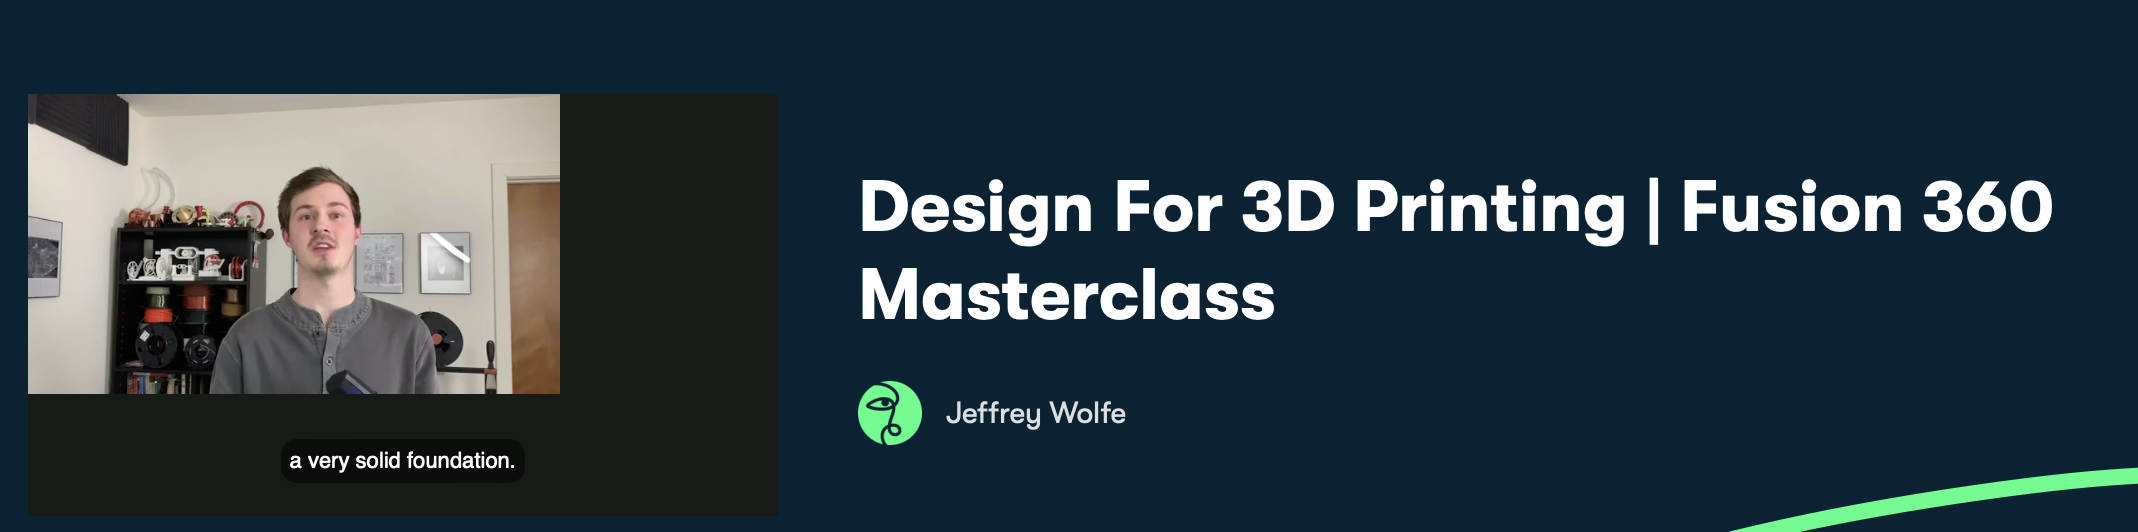 Design for 3D Printing Fusion 360 Masterclass